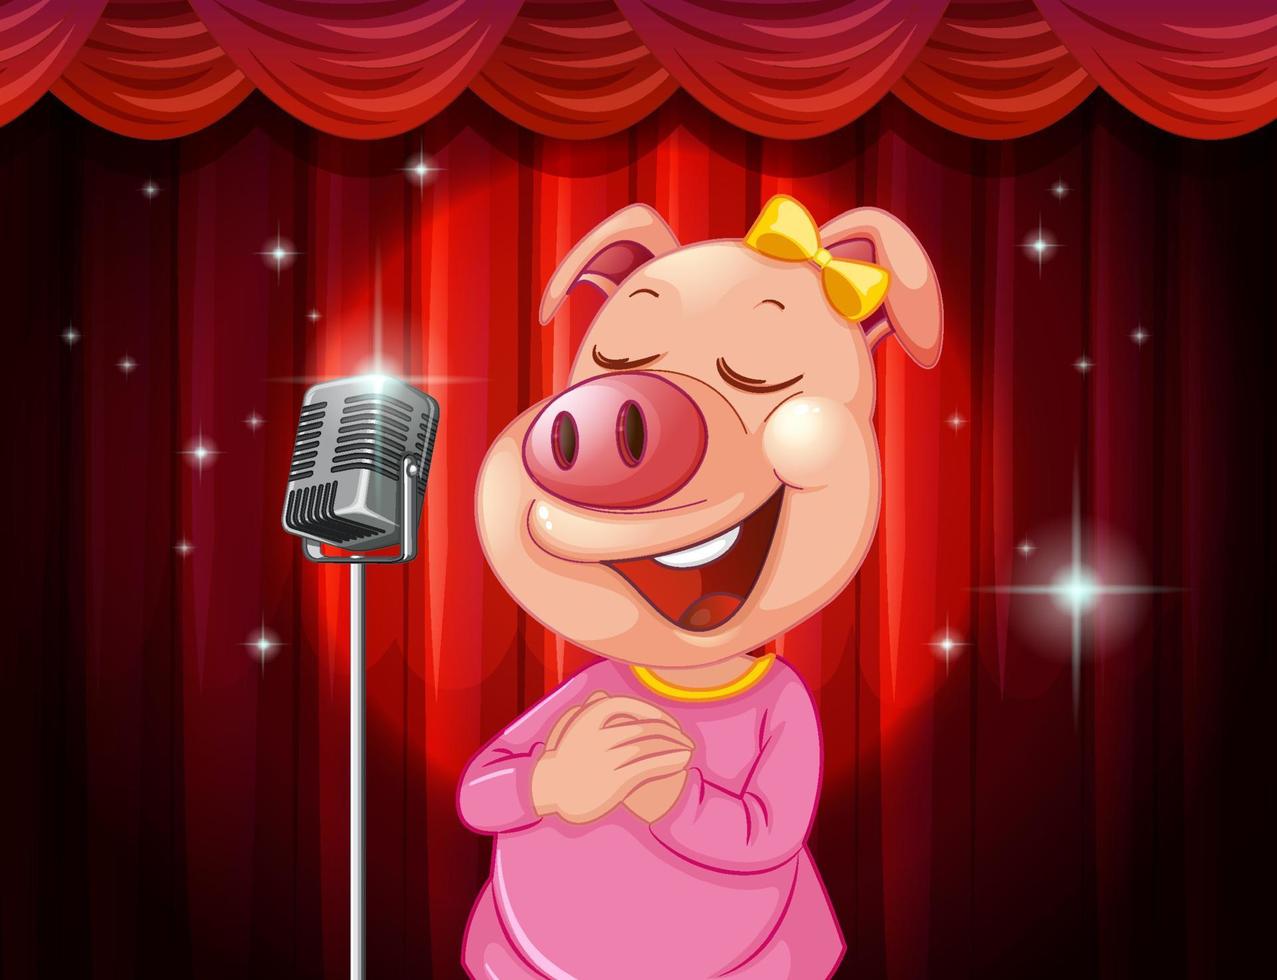 Little cute piglet singing on stage vector